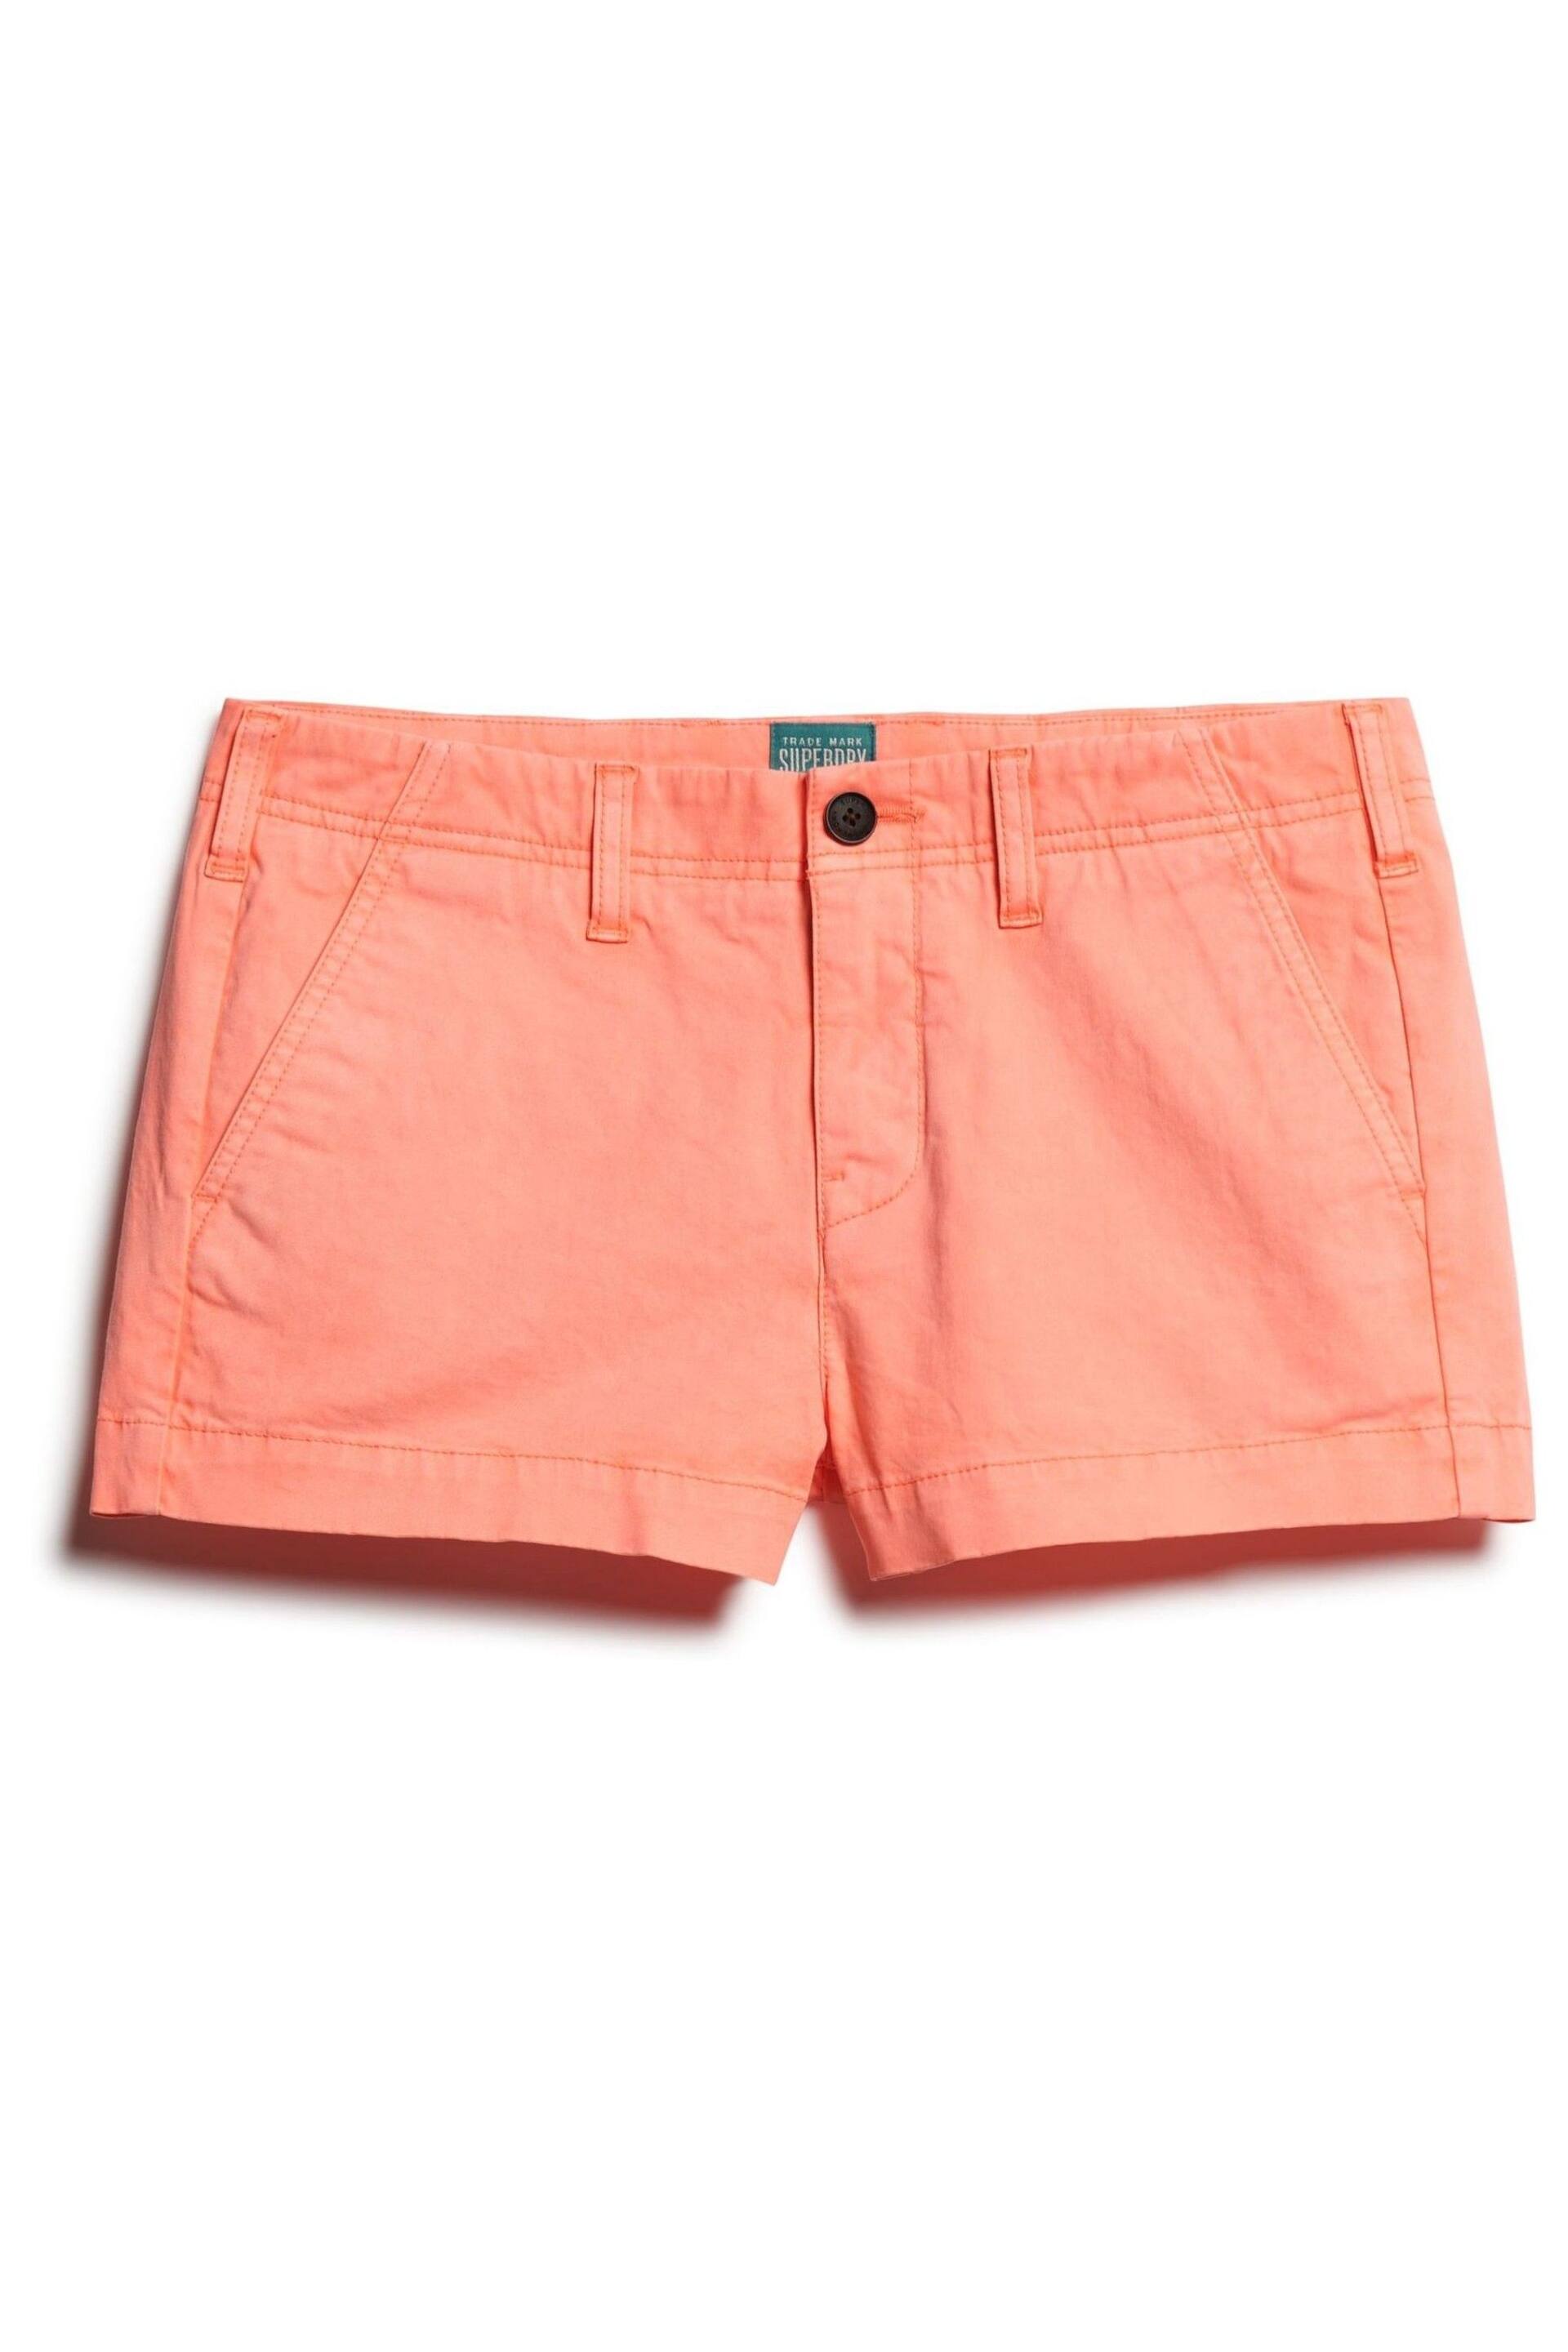 Superdry Red Chino Hot Shorts - Image 5 of 7